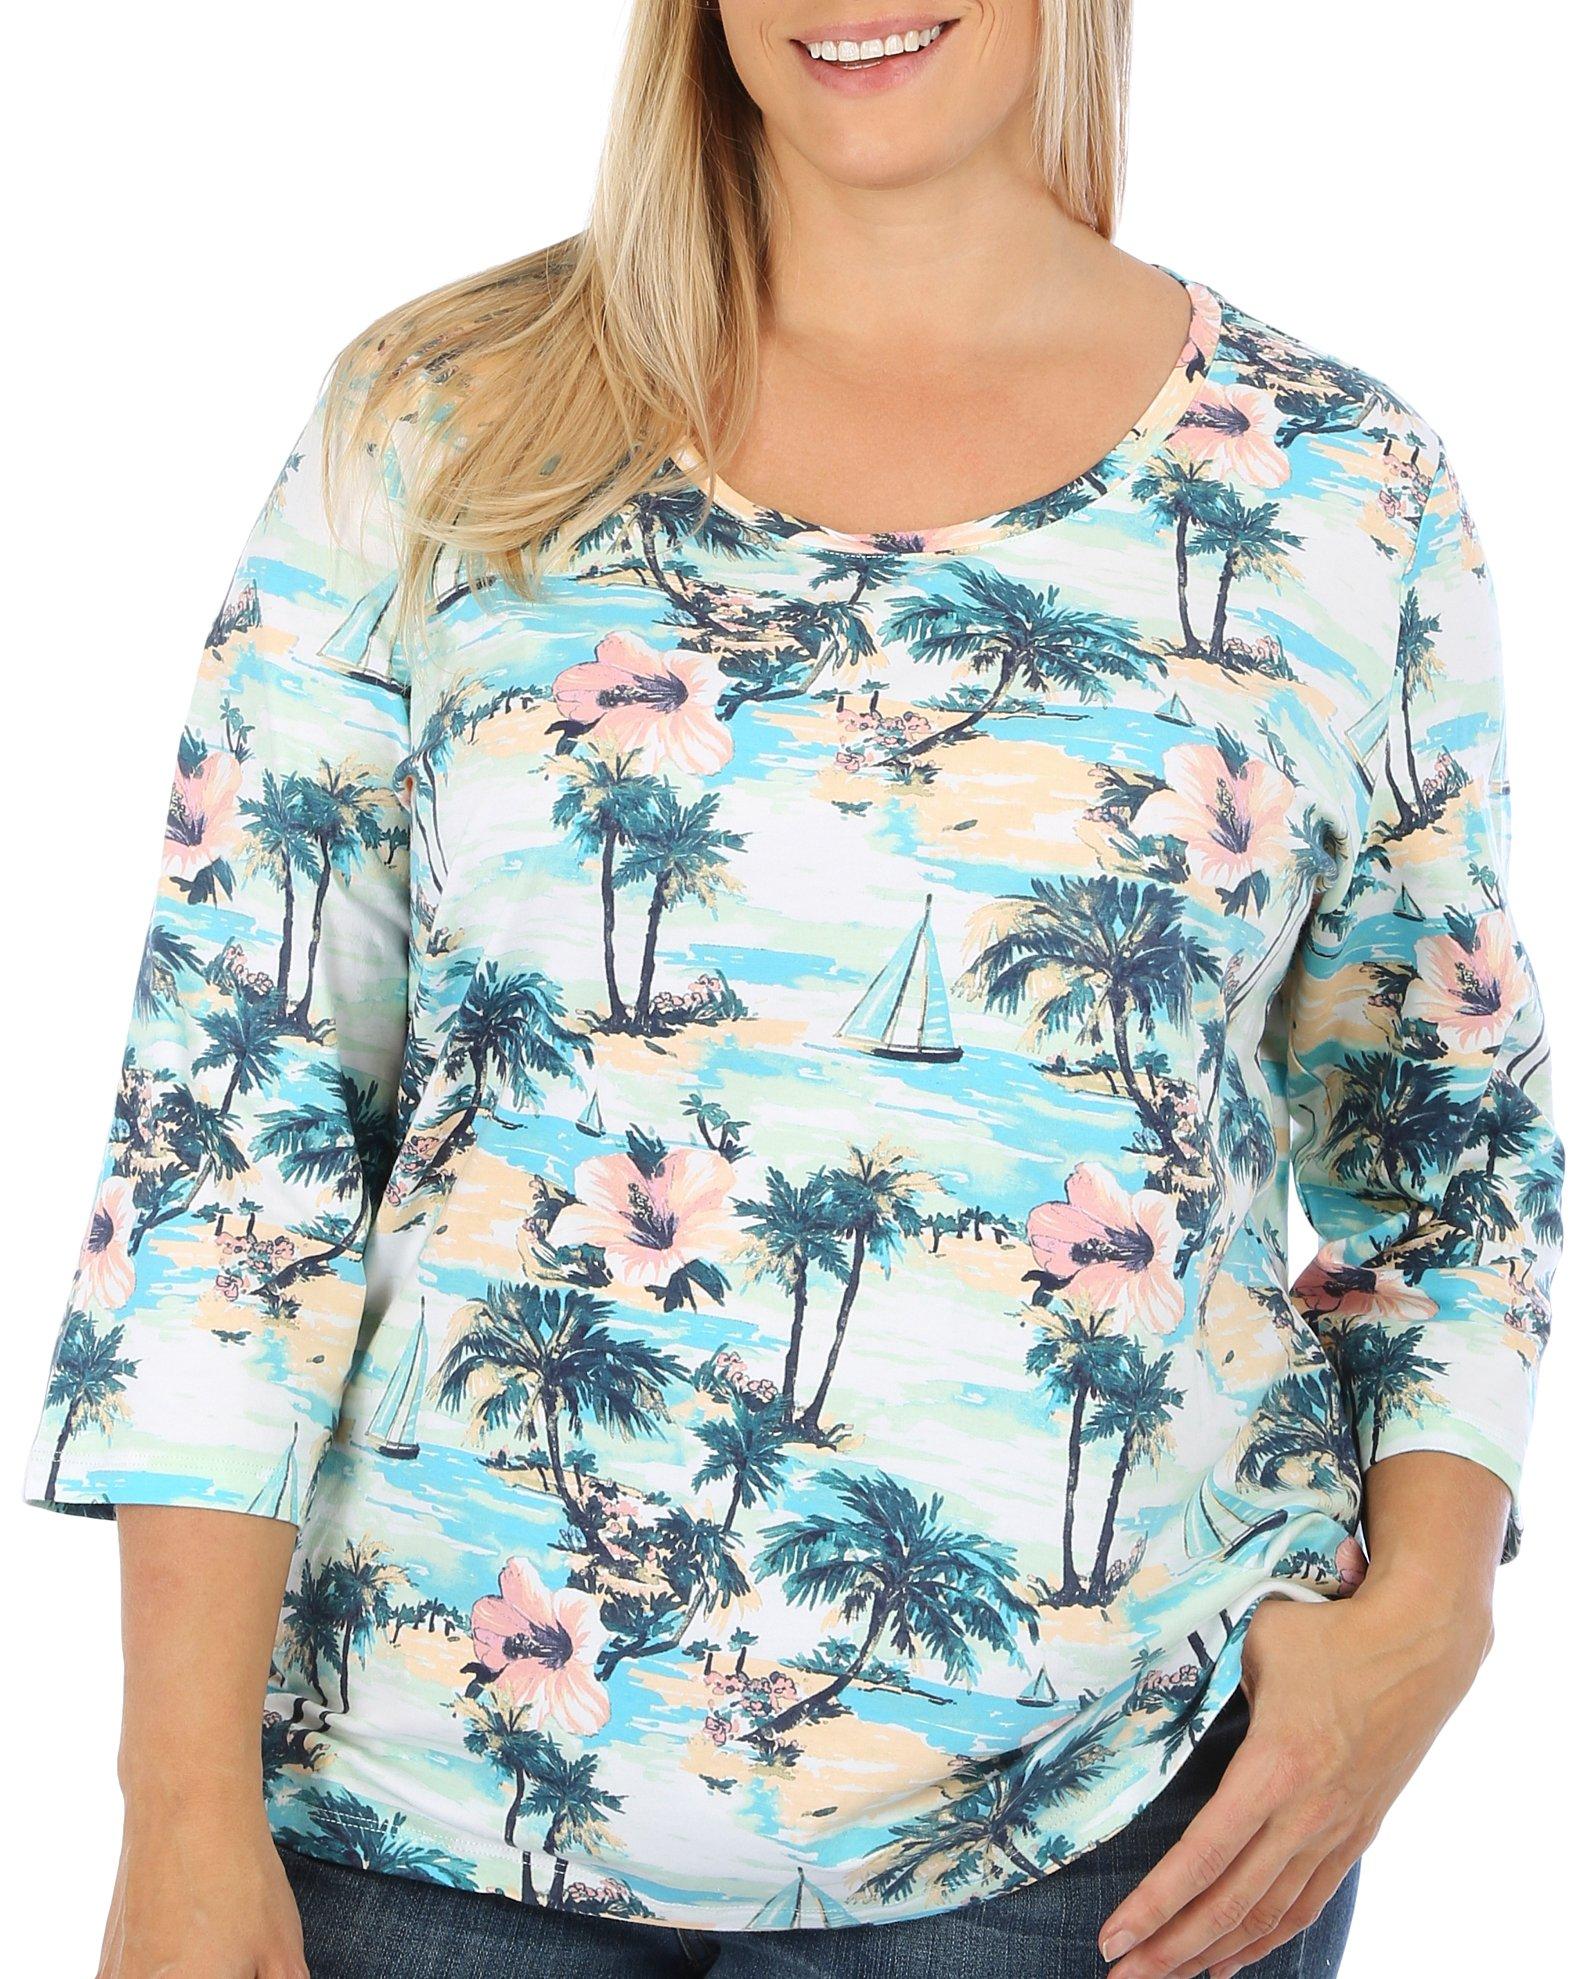 Coral Bay Plus Scenic Print 3/4 Sleeve Top